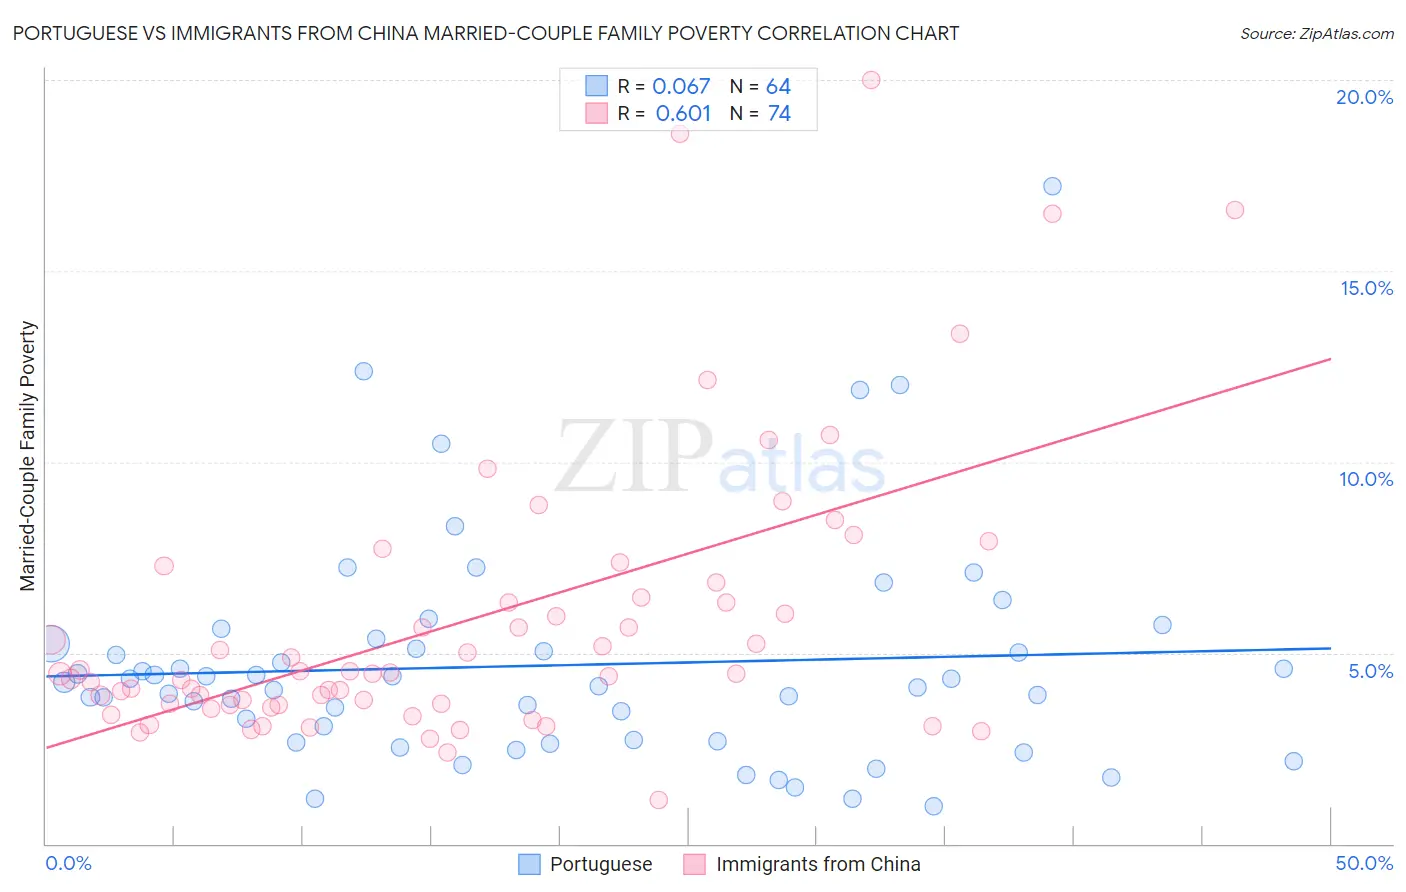 Portuguese vs Immigrants from China Married-Couple Family Poverty